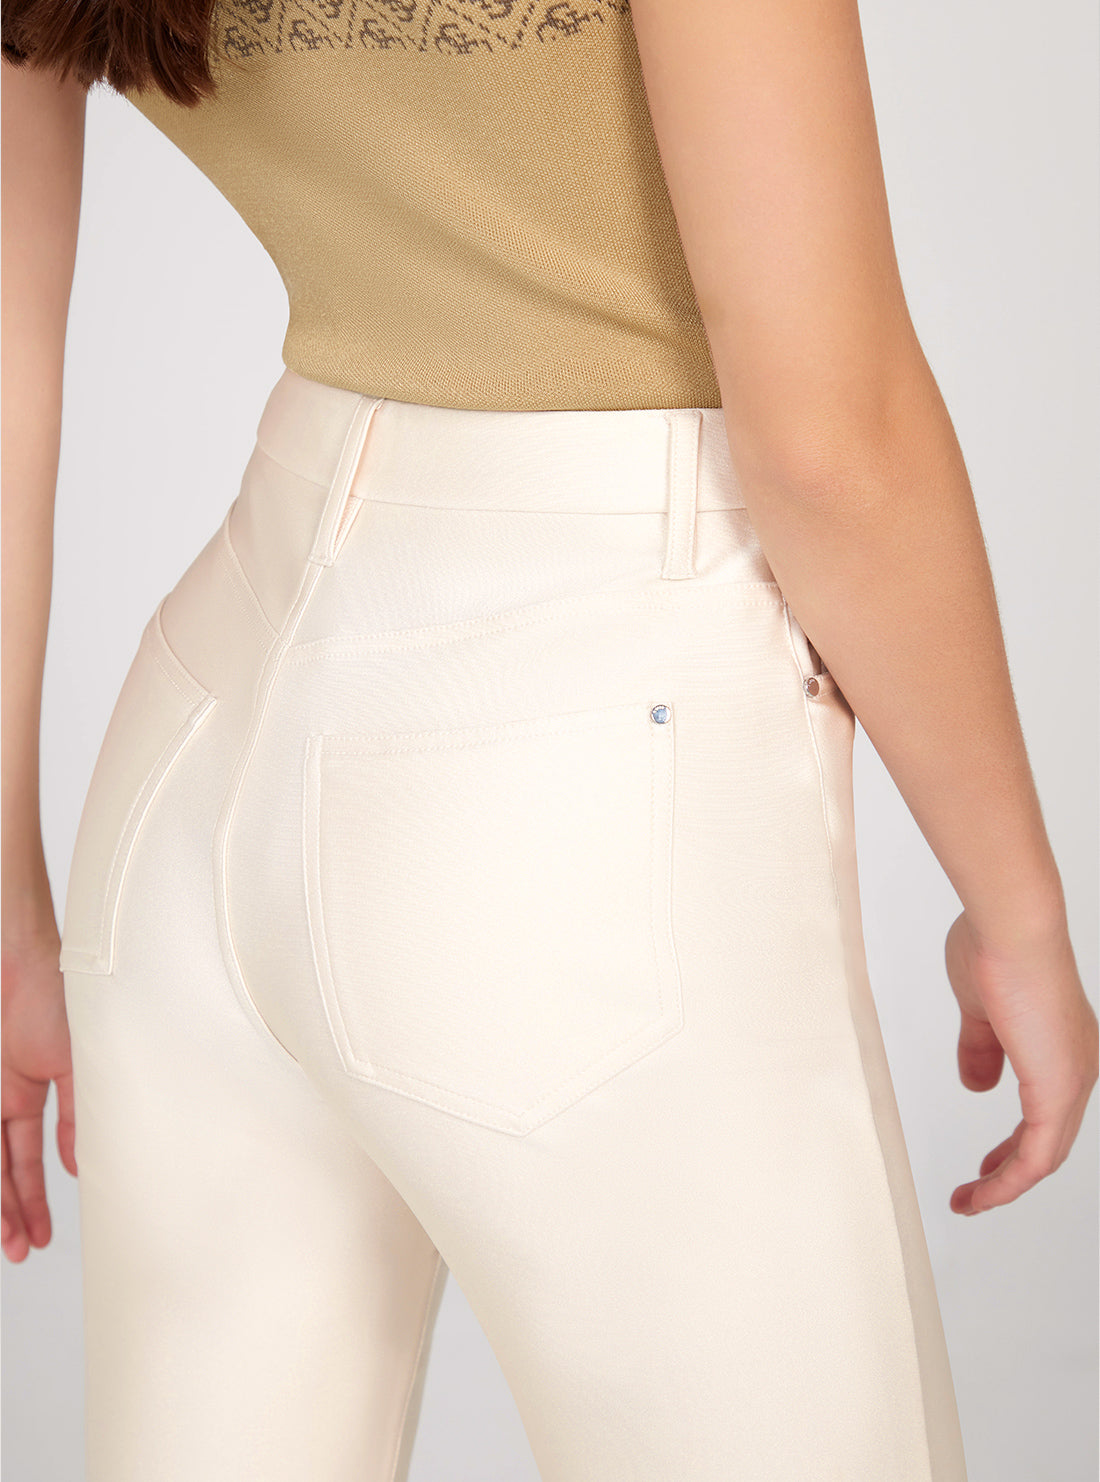 GUESS Stone High-Rise 80s Straight Pants detail view